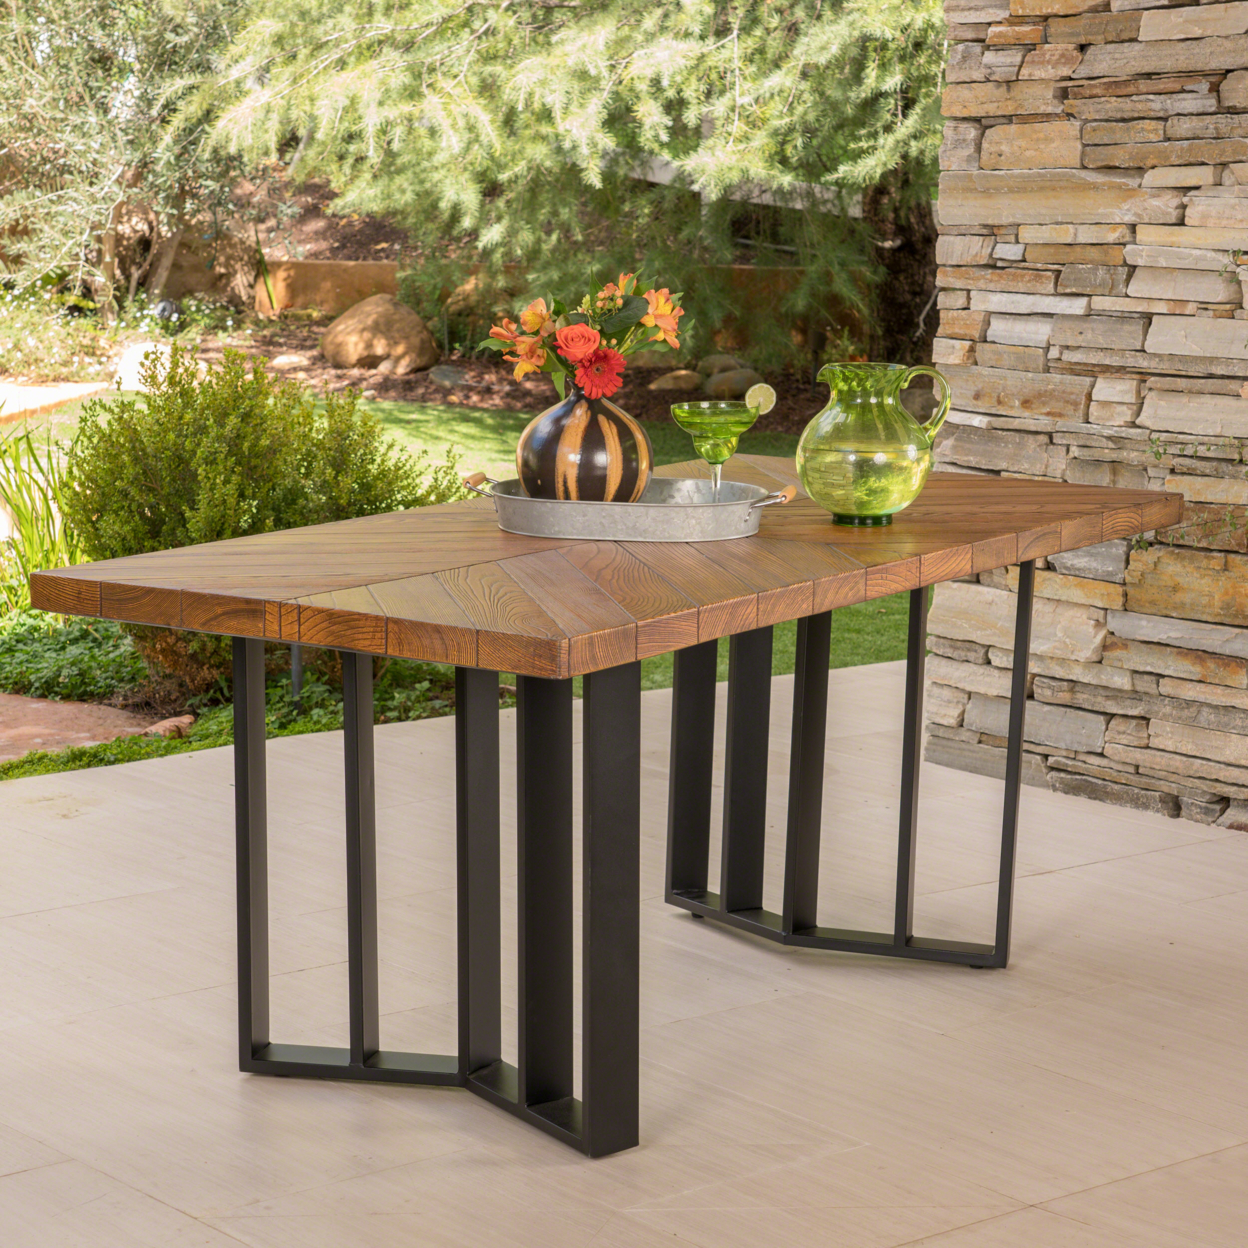 Santa Rosa Outdoor Finish Light Weight Concrete Dining Table - Textured Gray